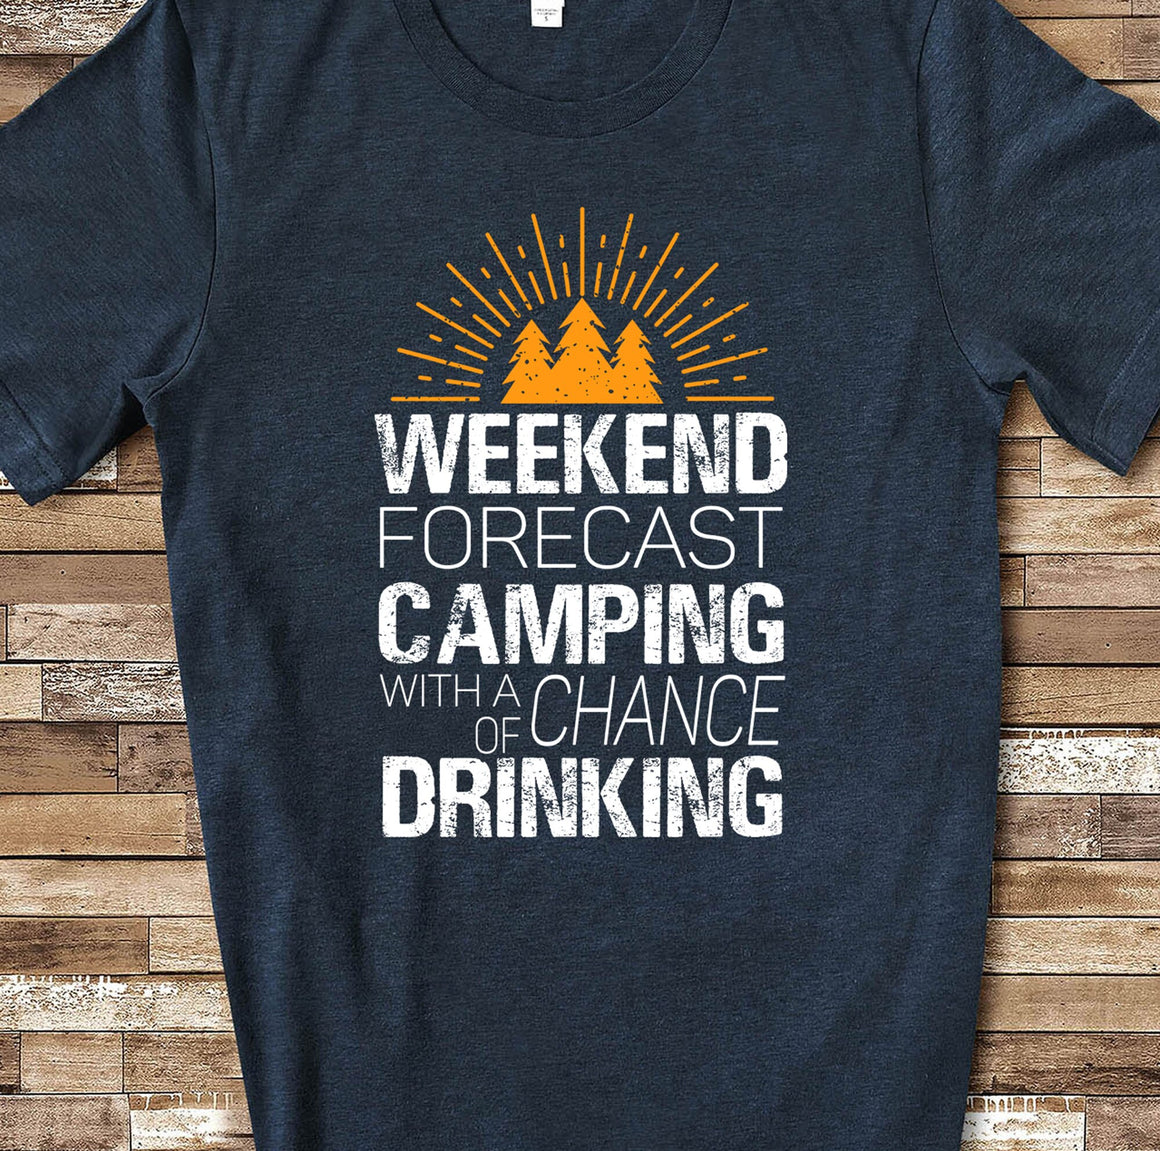 Weekend Forecast Camping with a Chance of Drinking Funny Camping Drinking T-Shirt, Long Sleeve Shirt, Sweatshirt for Glamper